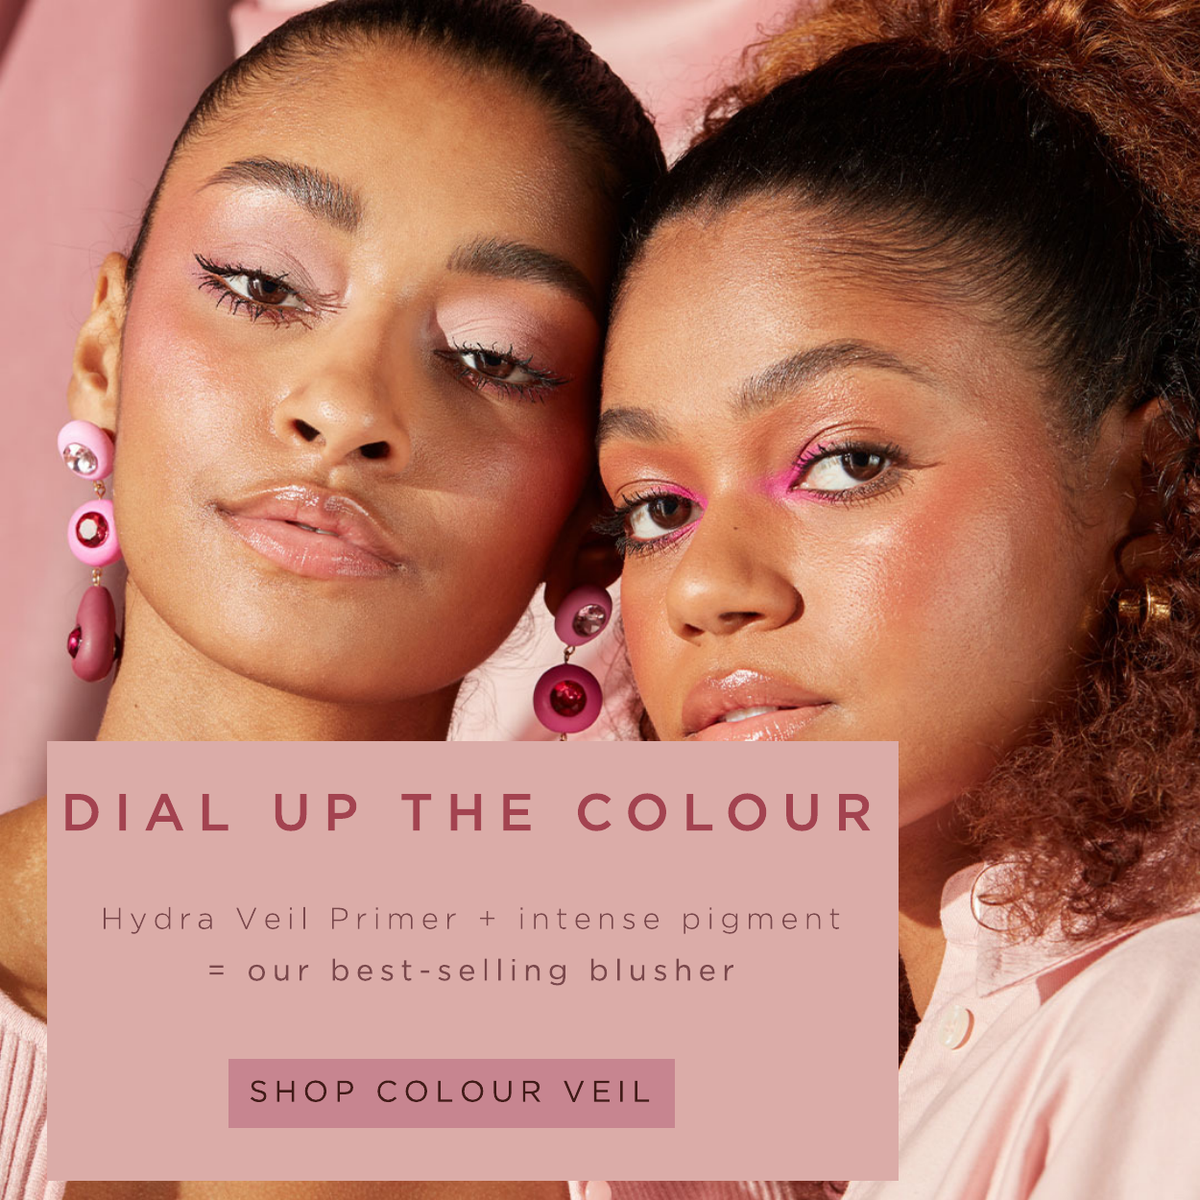 Colour Veil models on a pink background.